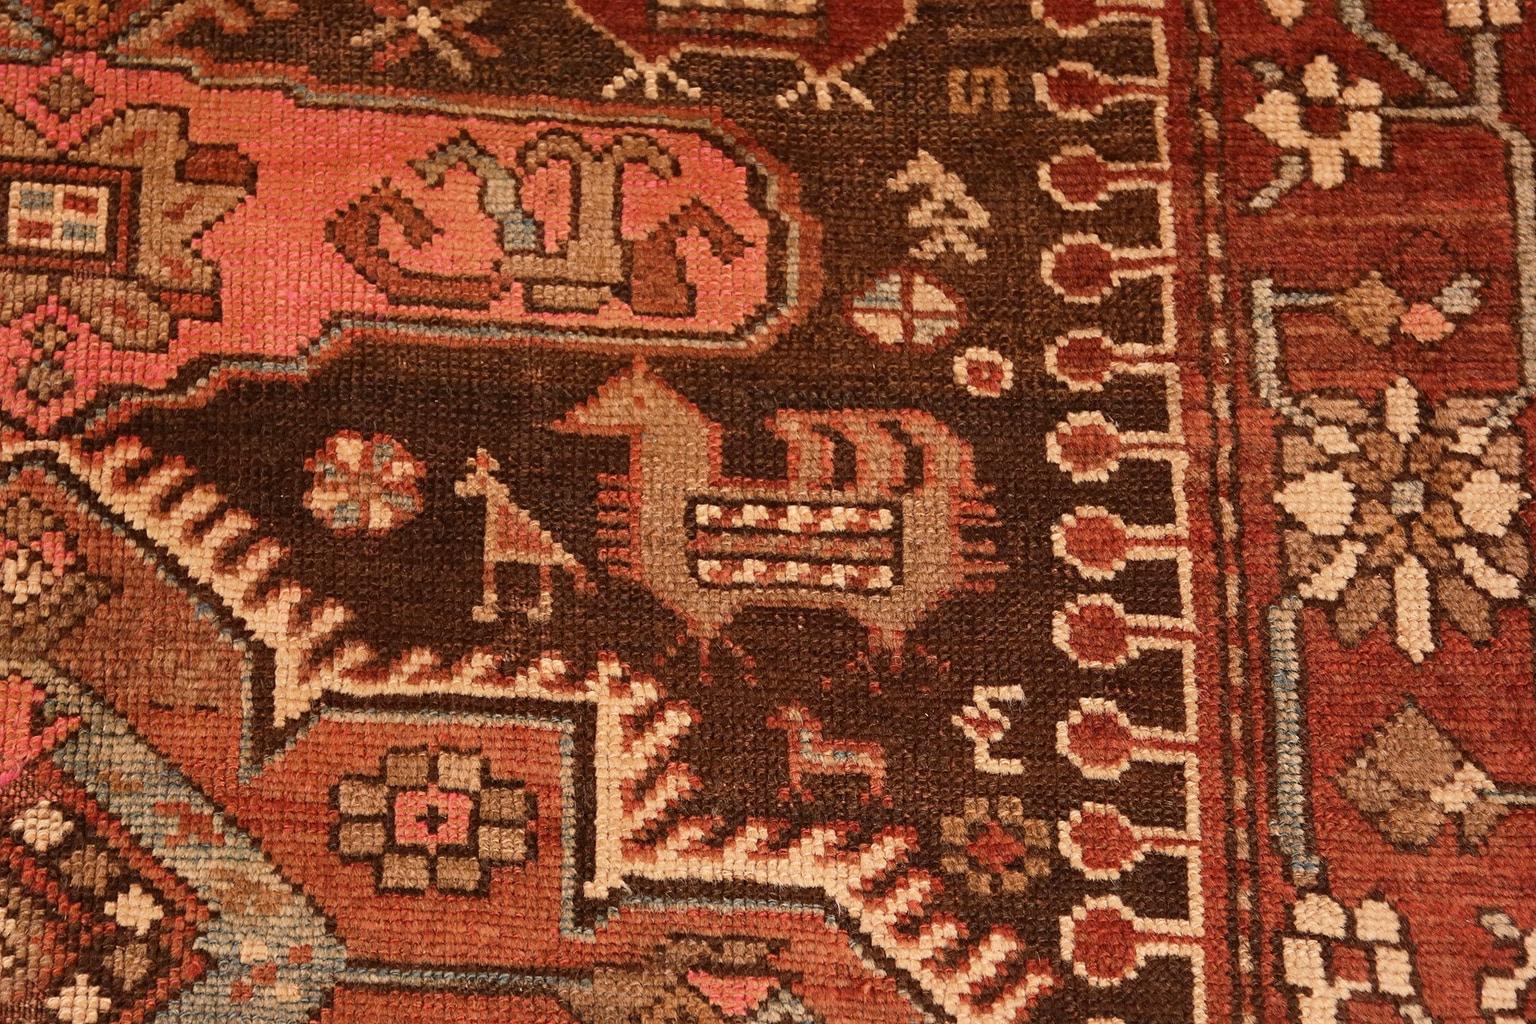 Hand-Knotted Small Antique Tribal Caucasian Kazak Rug. Size: 4 ft x 8 ft